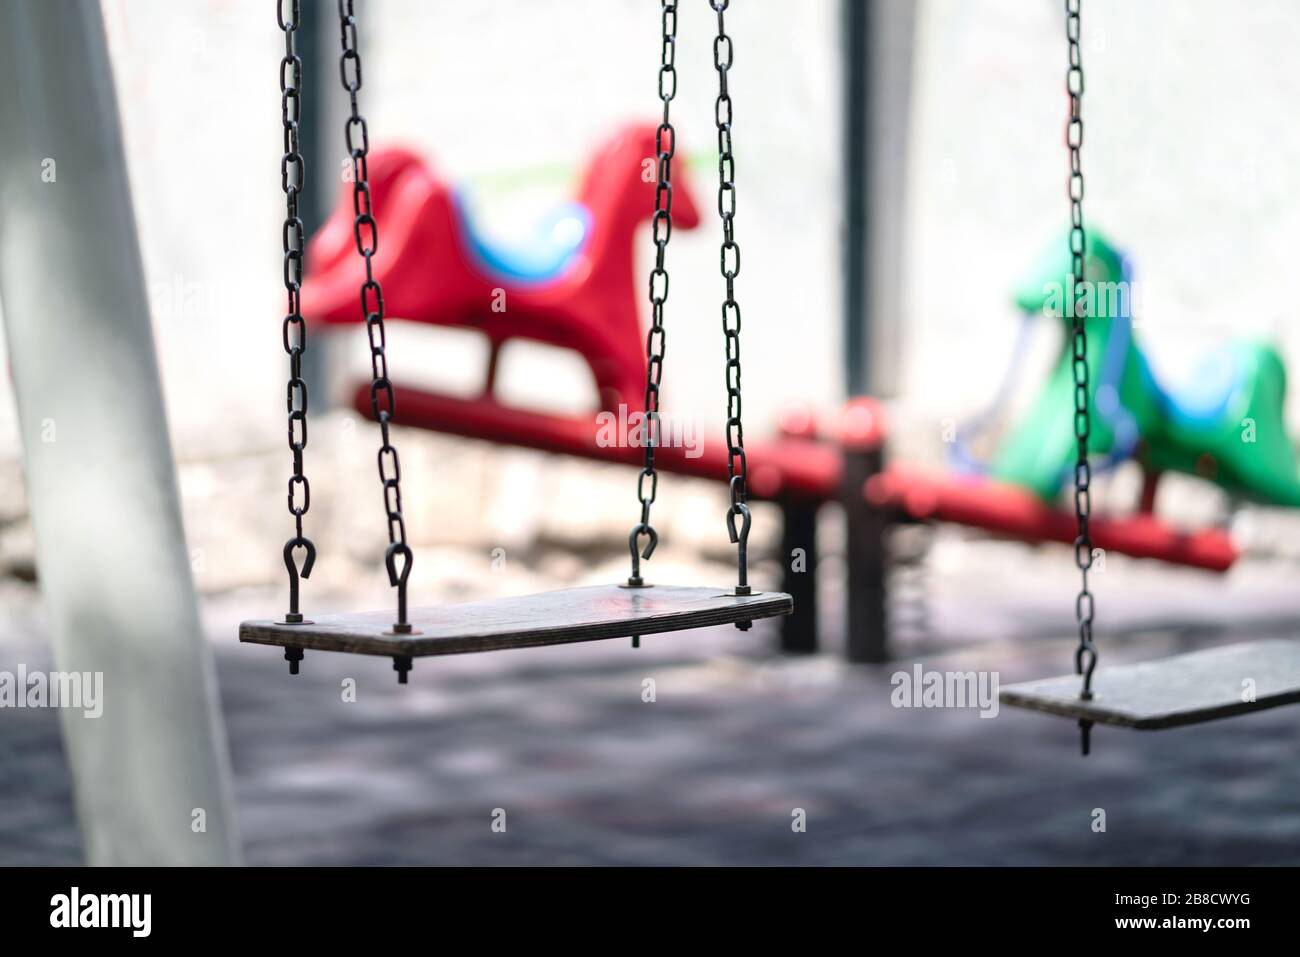 Empty swing at a playground. Sad dramatic mood for negative themes such as bullying at school, child abuse, pedophilia, traumatic childhood or kidnap. Stock Photo